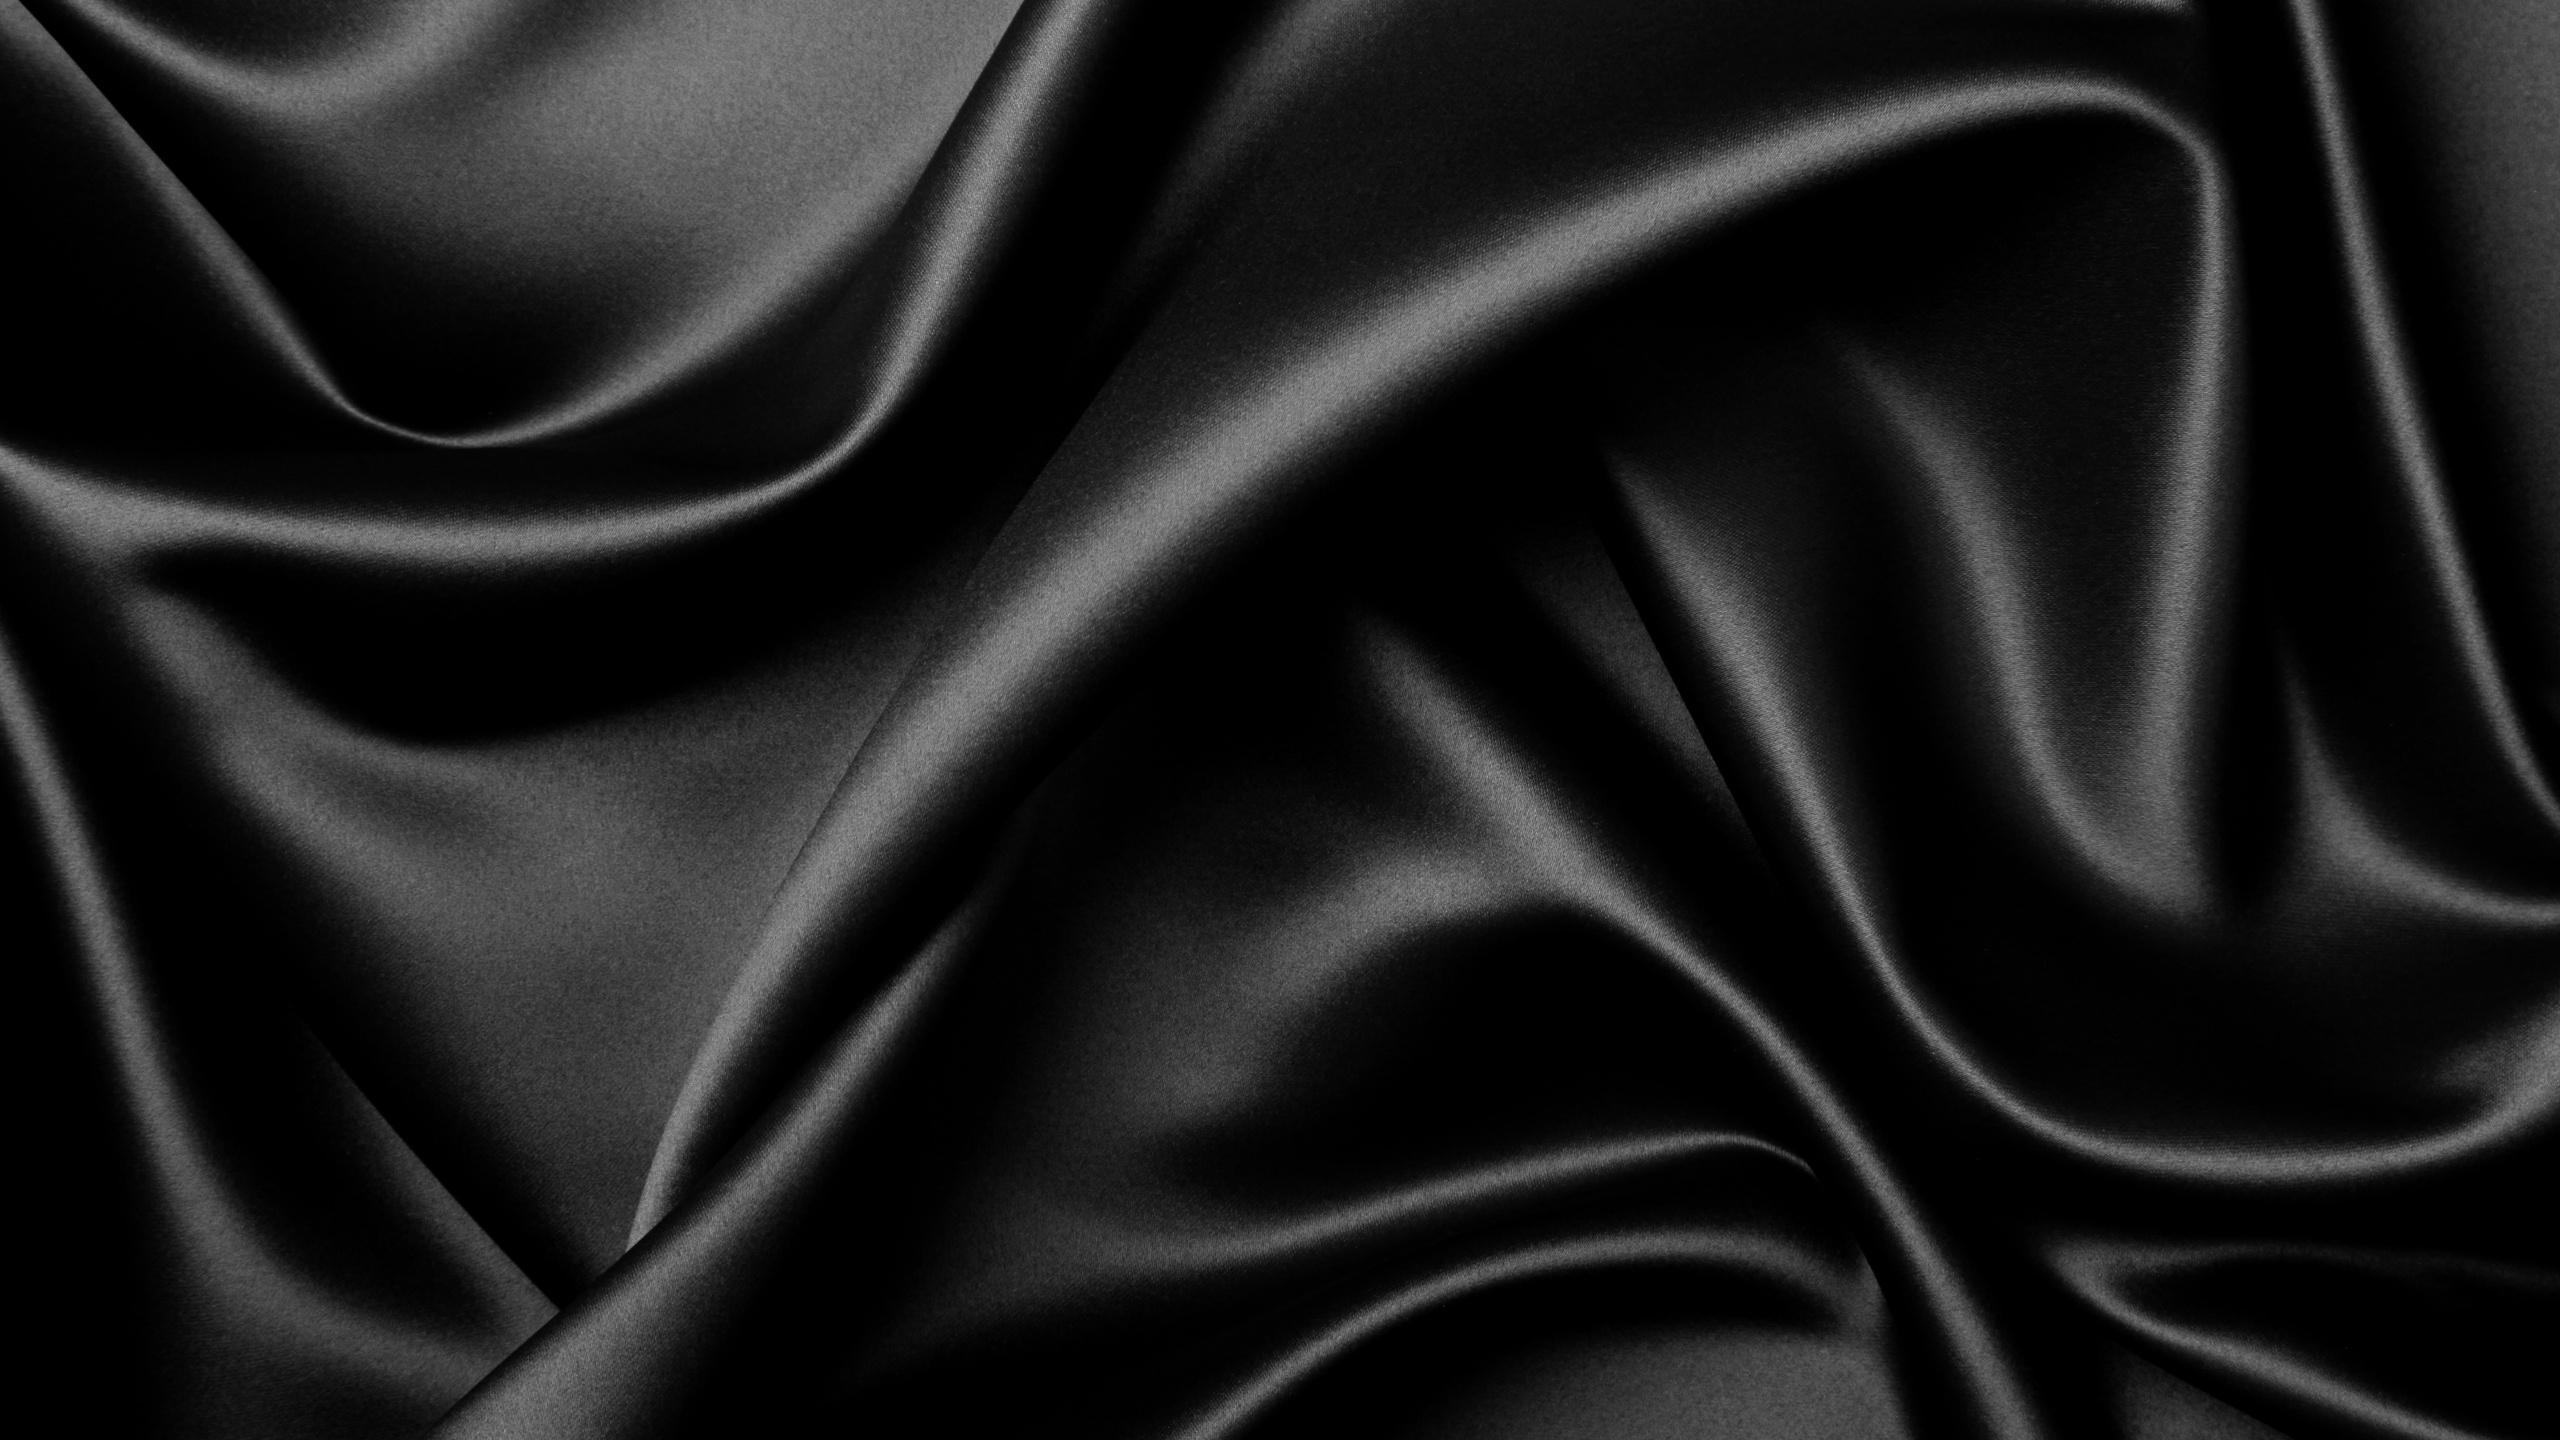 Black Textile in Grayscale Photography. Wallpaper in 2560x1440 Resolution